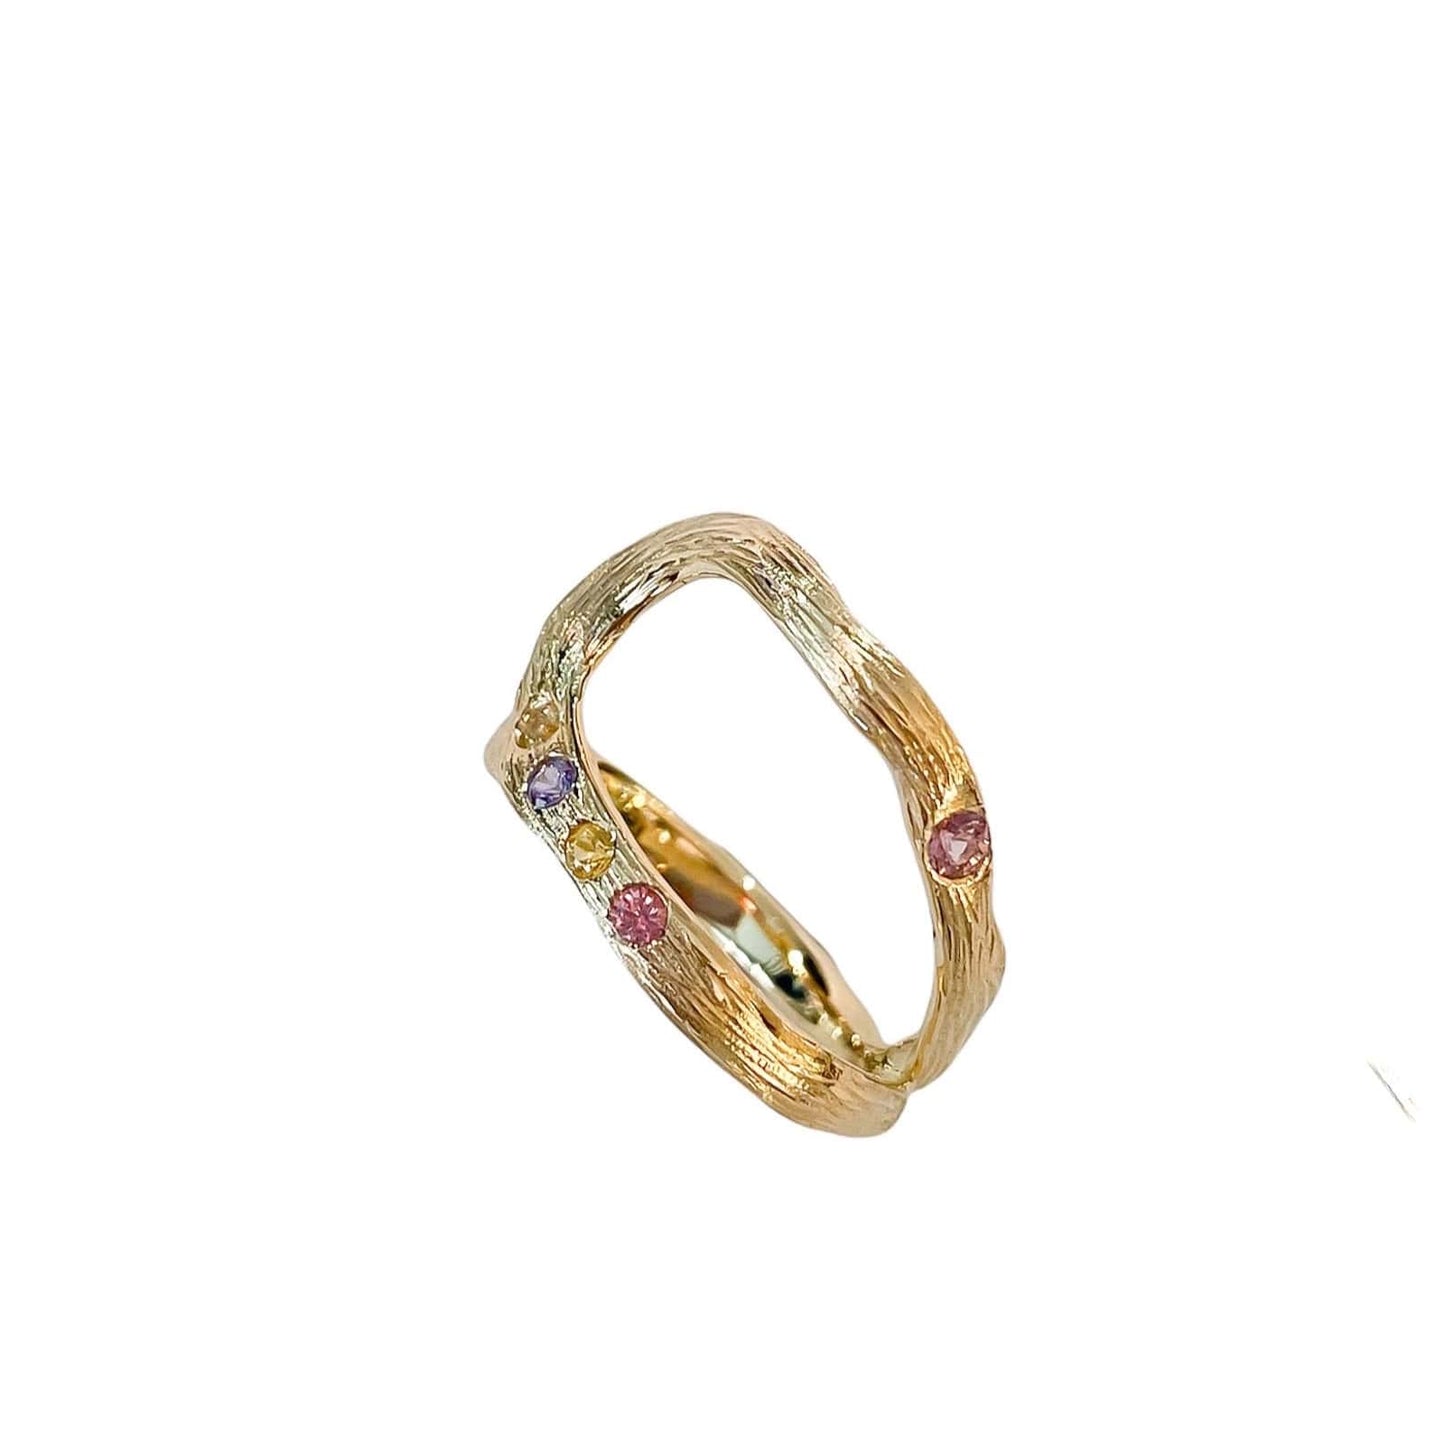 Simone Noa Oceania 14 kt gold sapphire ring, side view.